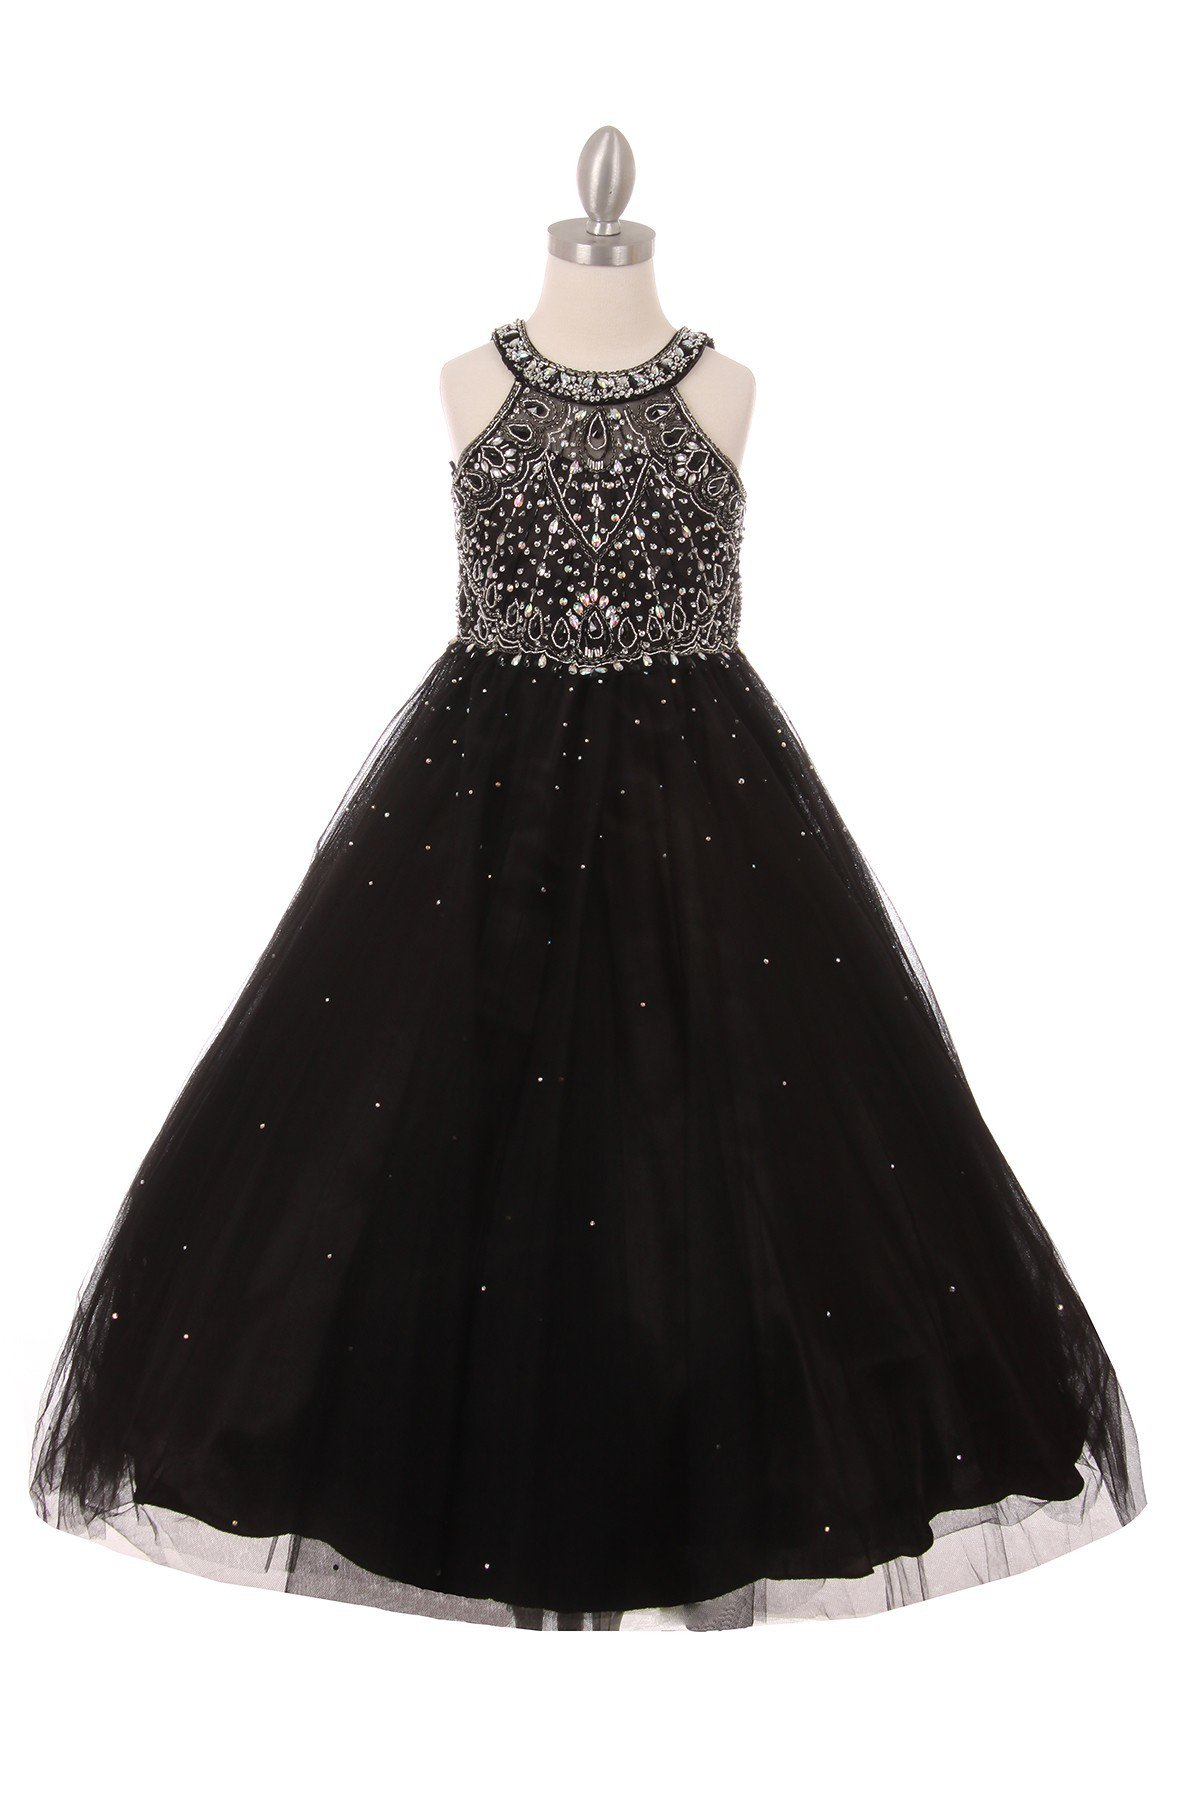 Girls black princess style long dress rhinestones pageant wedding party ball gown.